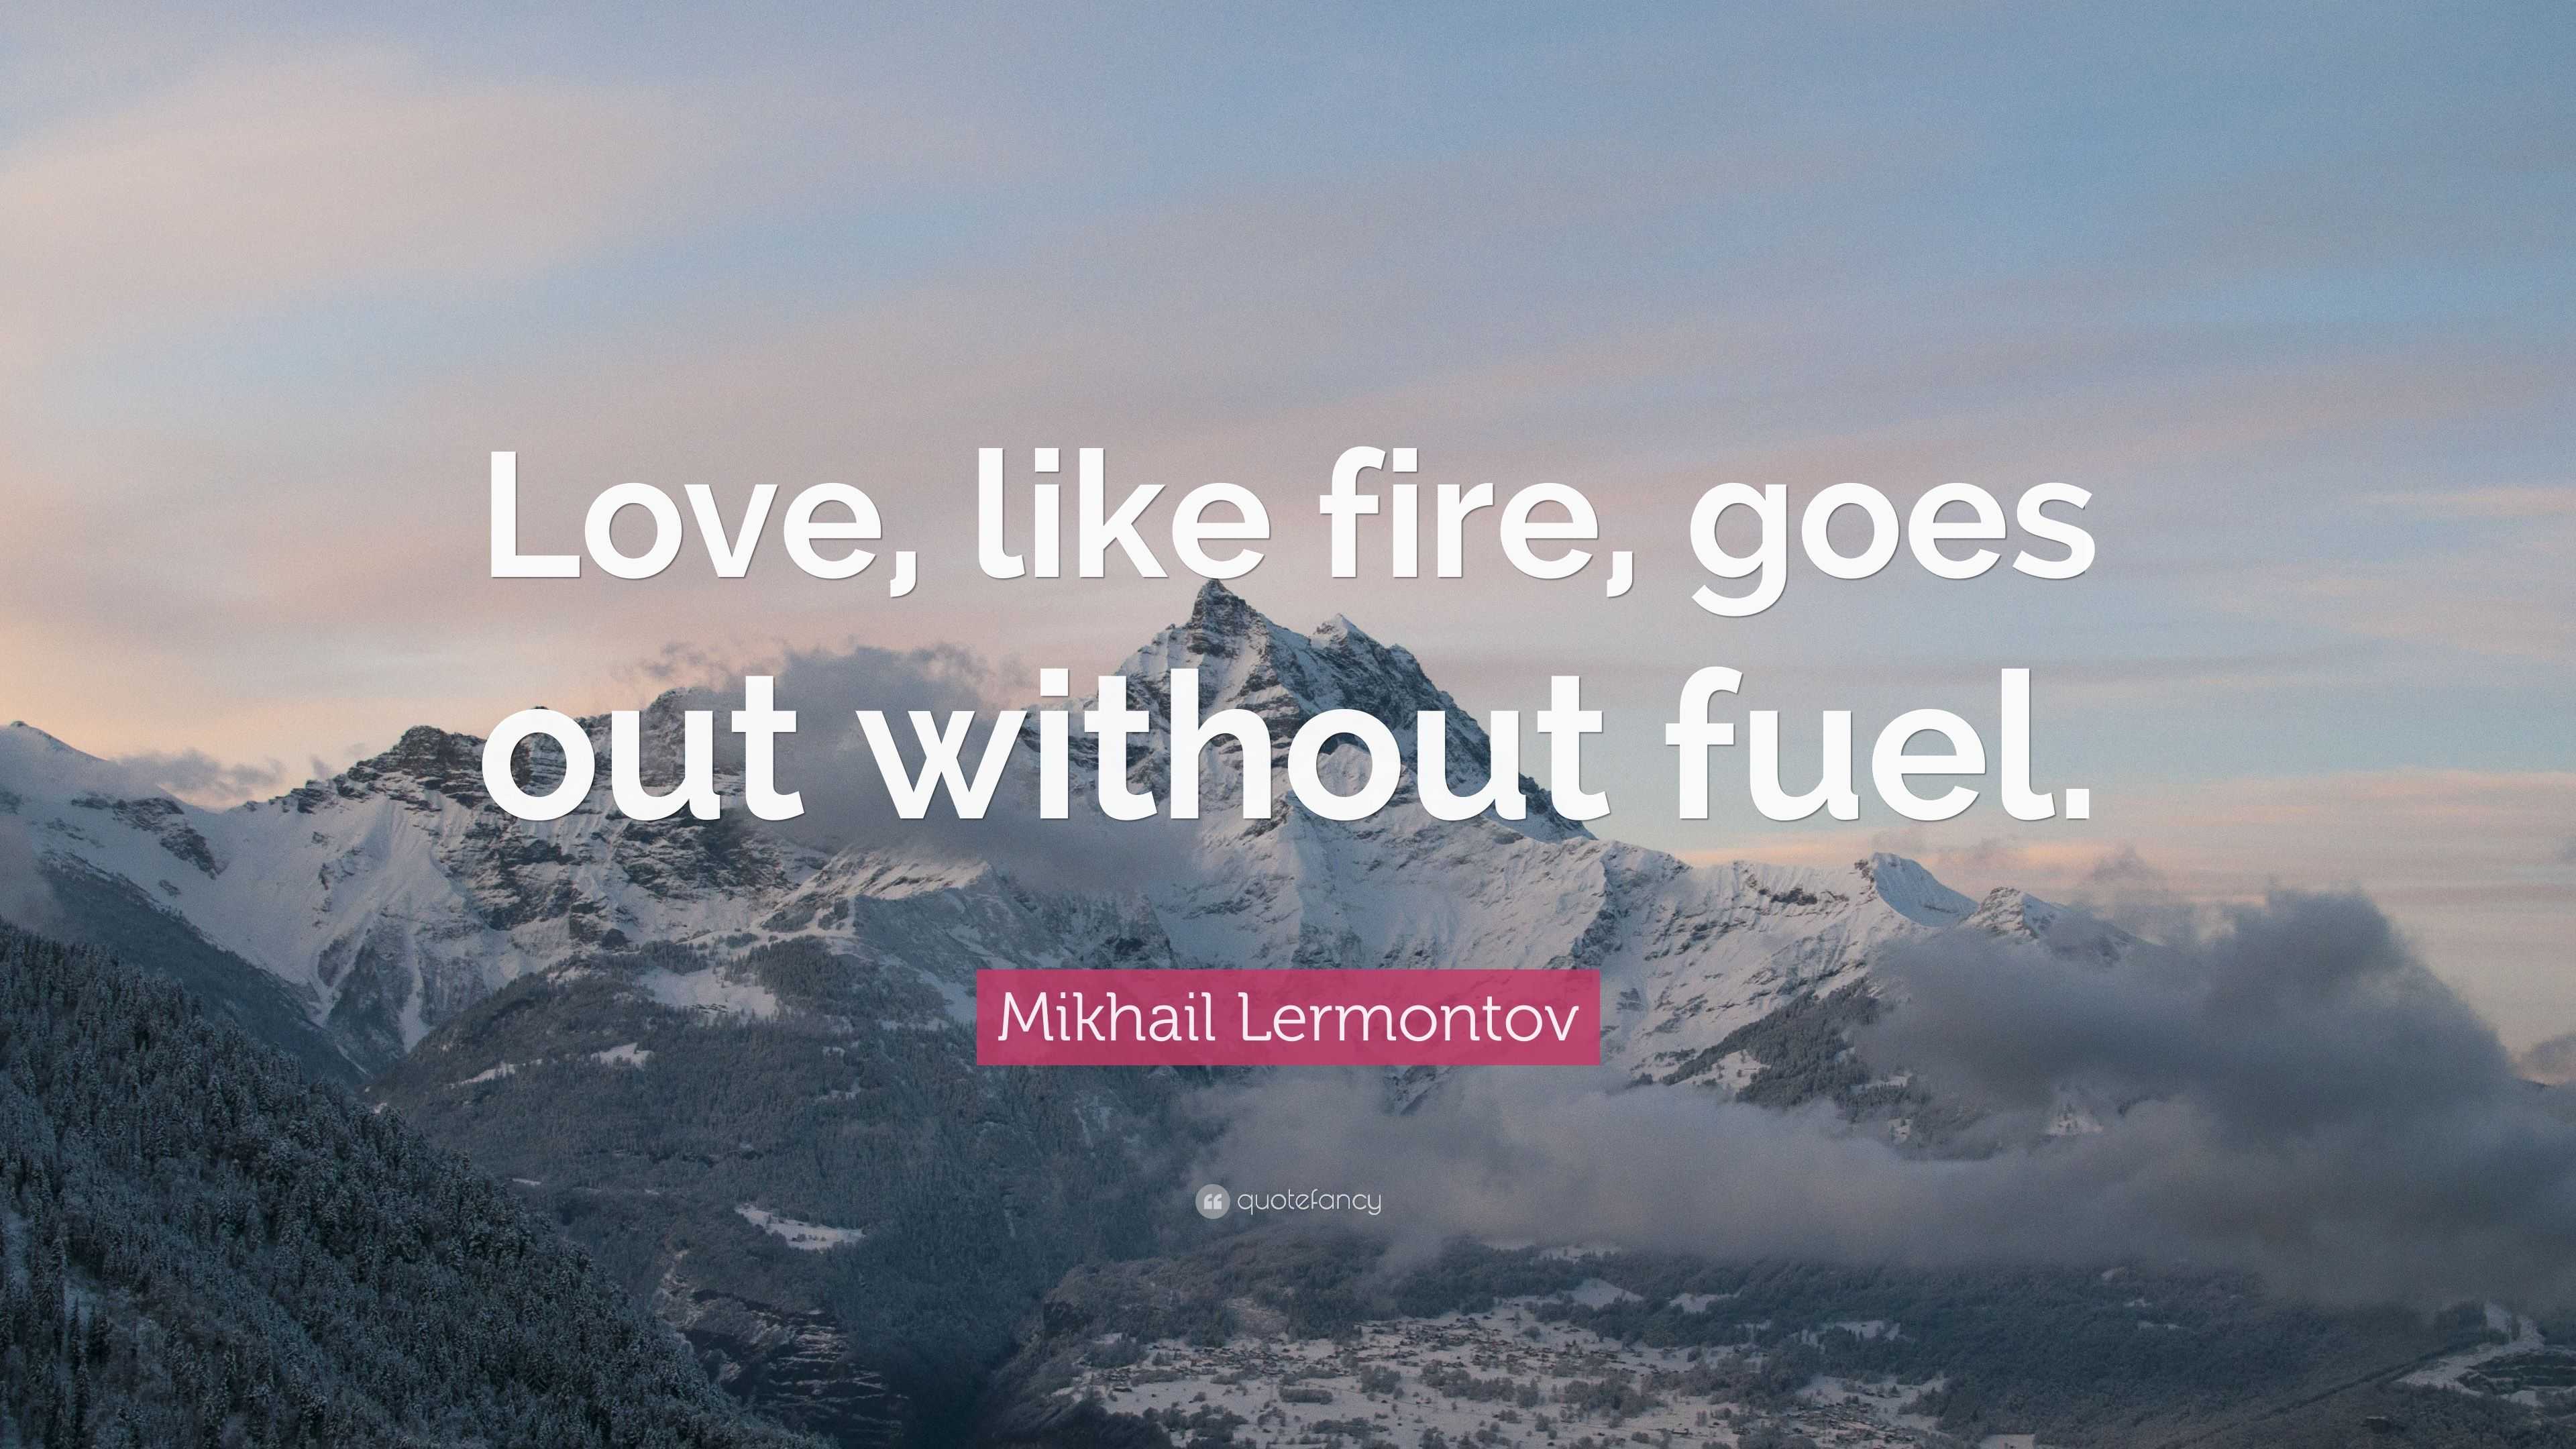 Mikhail Lermontov Quote “Love like fire goes out without fuel ”